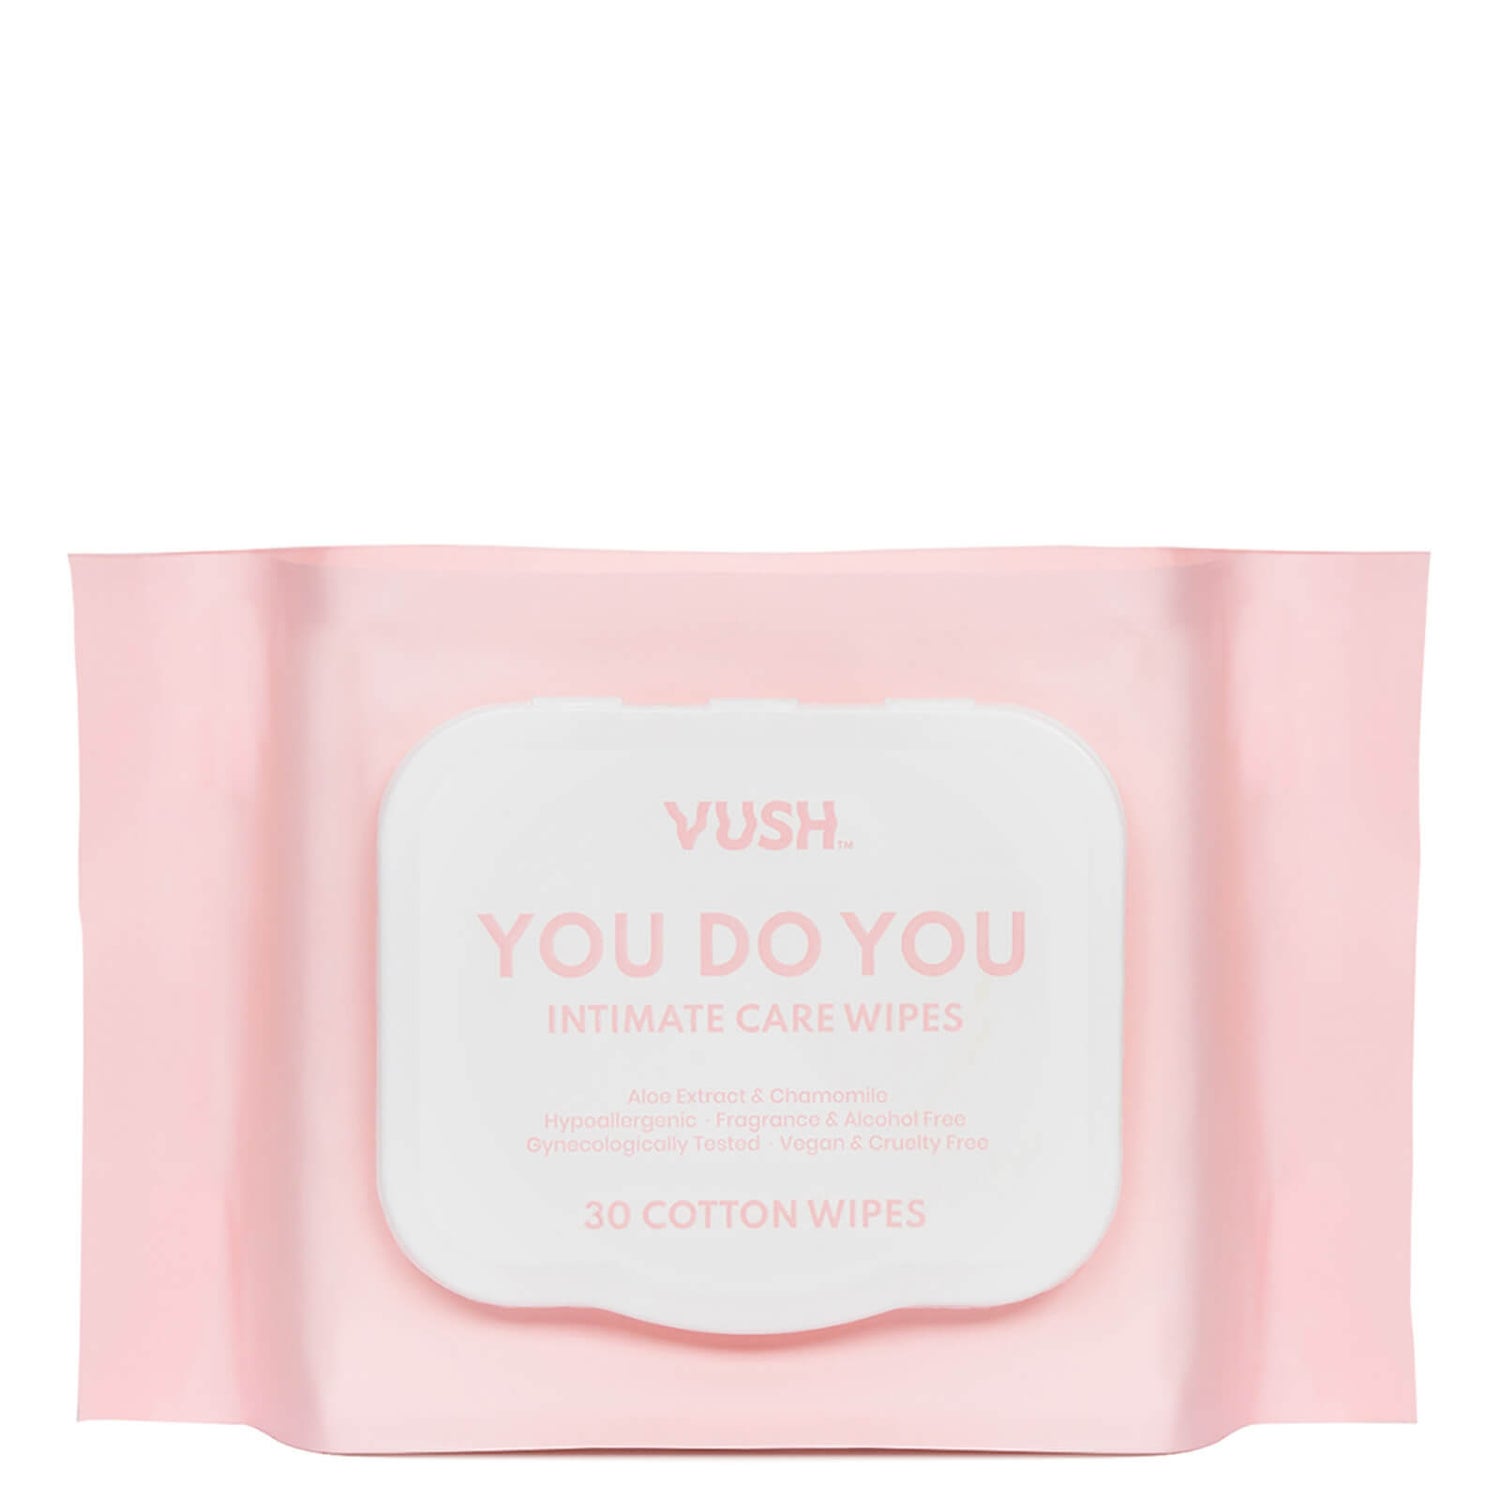 VUSH You Do You Intimate Care Wipes (30 Wipes)